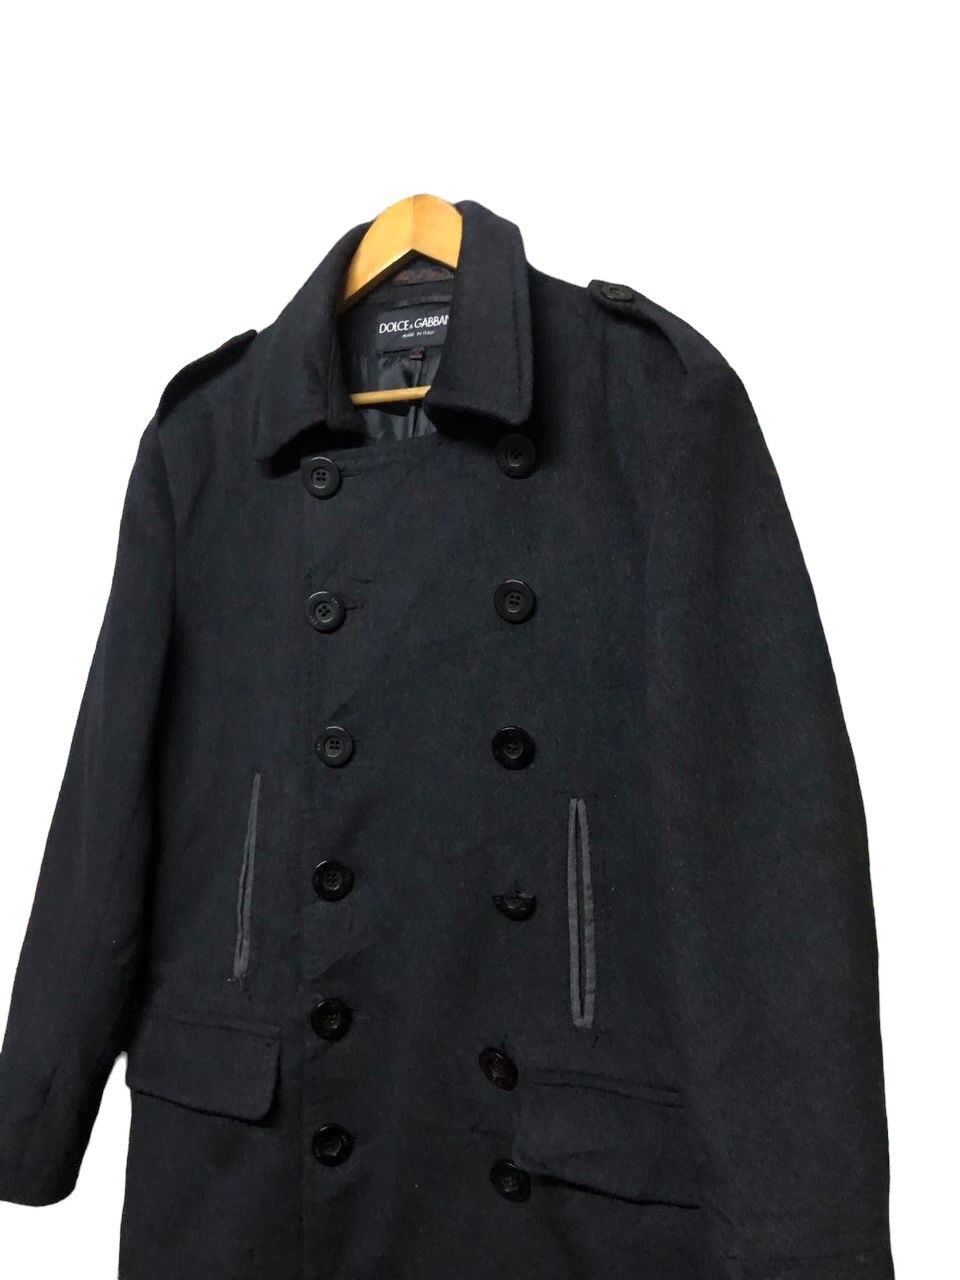 Dolce & Gabbana Wool Blend Double Breasted Overcoat - 5